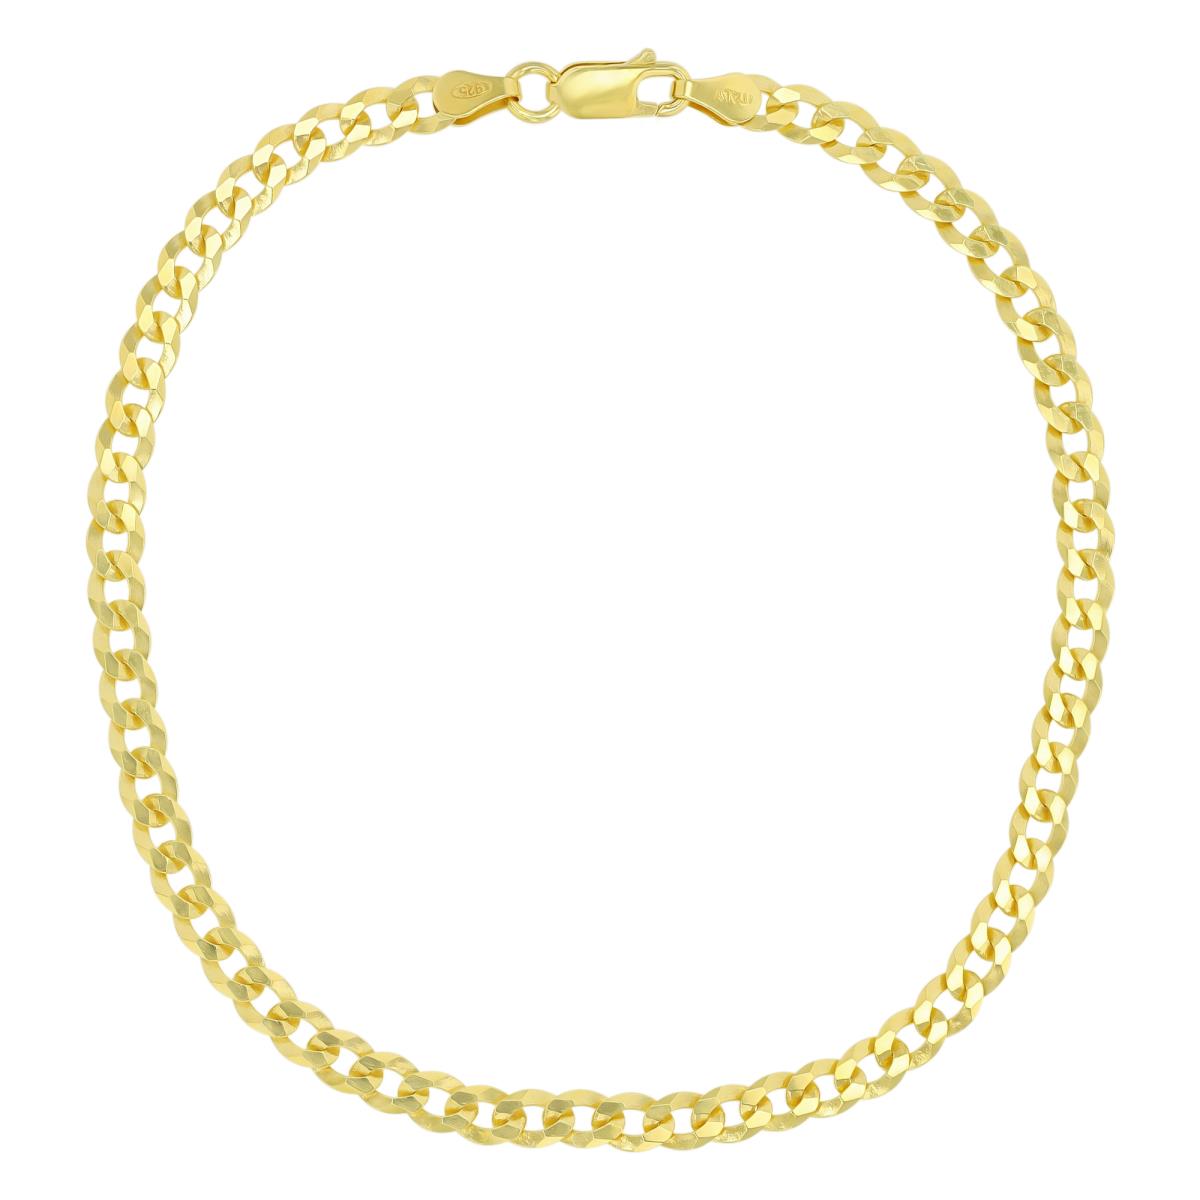 Sterling Silver Yellow 4.5mm 120 Flat Curb 8.25"Chain Bracelet